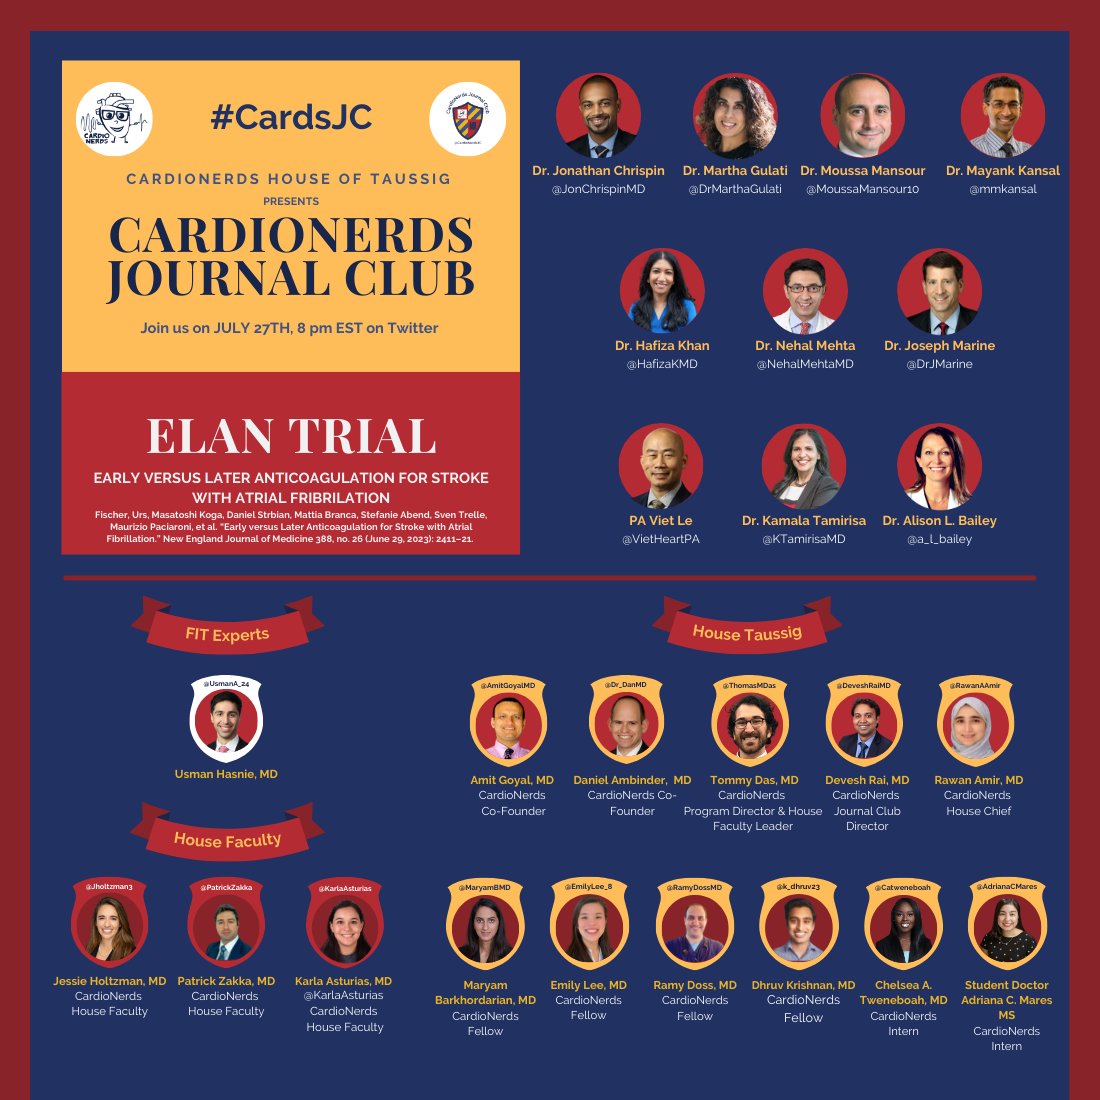 Join us tonight at 8 PM to learn and discuss ELAN trial with a great team of experts and House Taussig!! #CardsJC @DrMarthaGulati @JonChrispinMD @MoussaMansour10 @mmkansal @hafizakmd @NehalMehtaMD @DrJMarine @VietHeartPA @KTamirisaMD @a_l_bailey @UsmanA_24